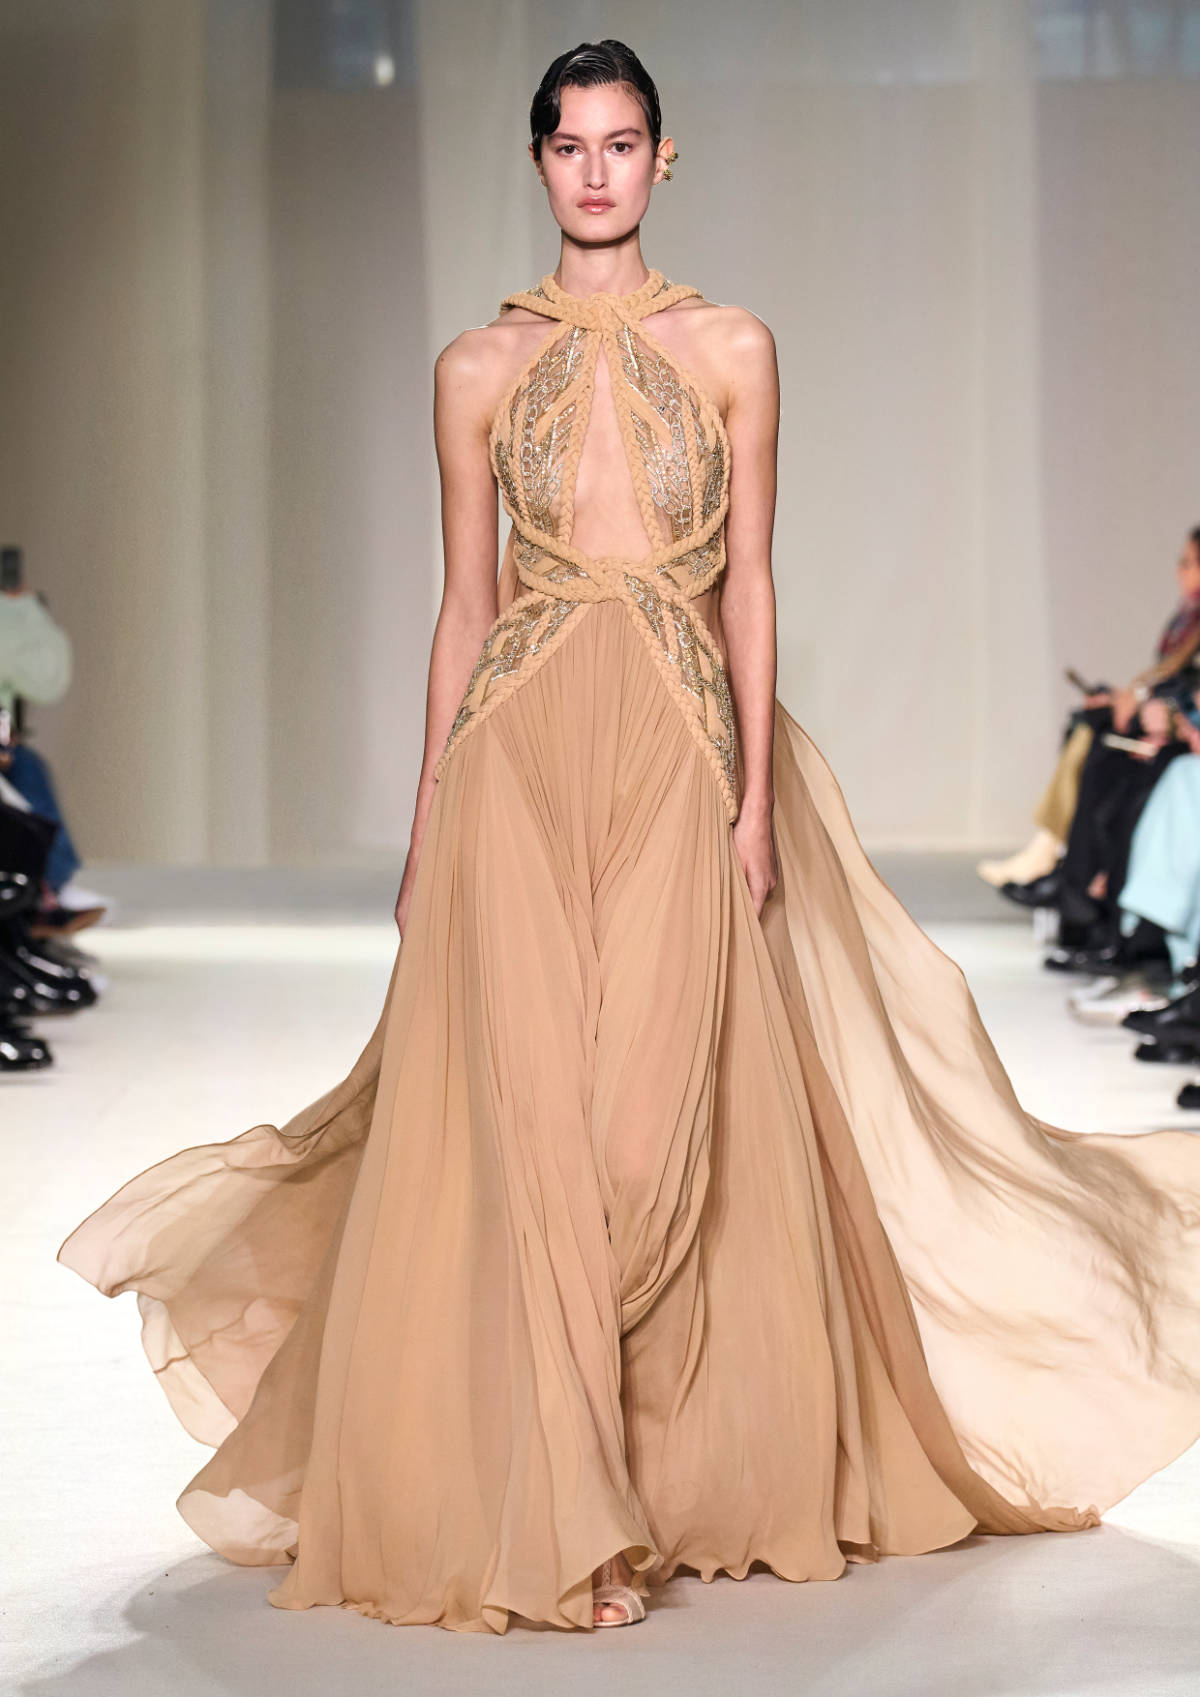 Elie Saab Presents His New Haute Couture Spring-Summer 2023 Collection: A Golden Down